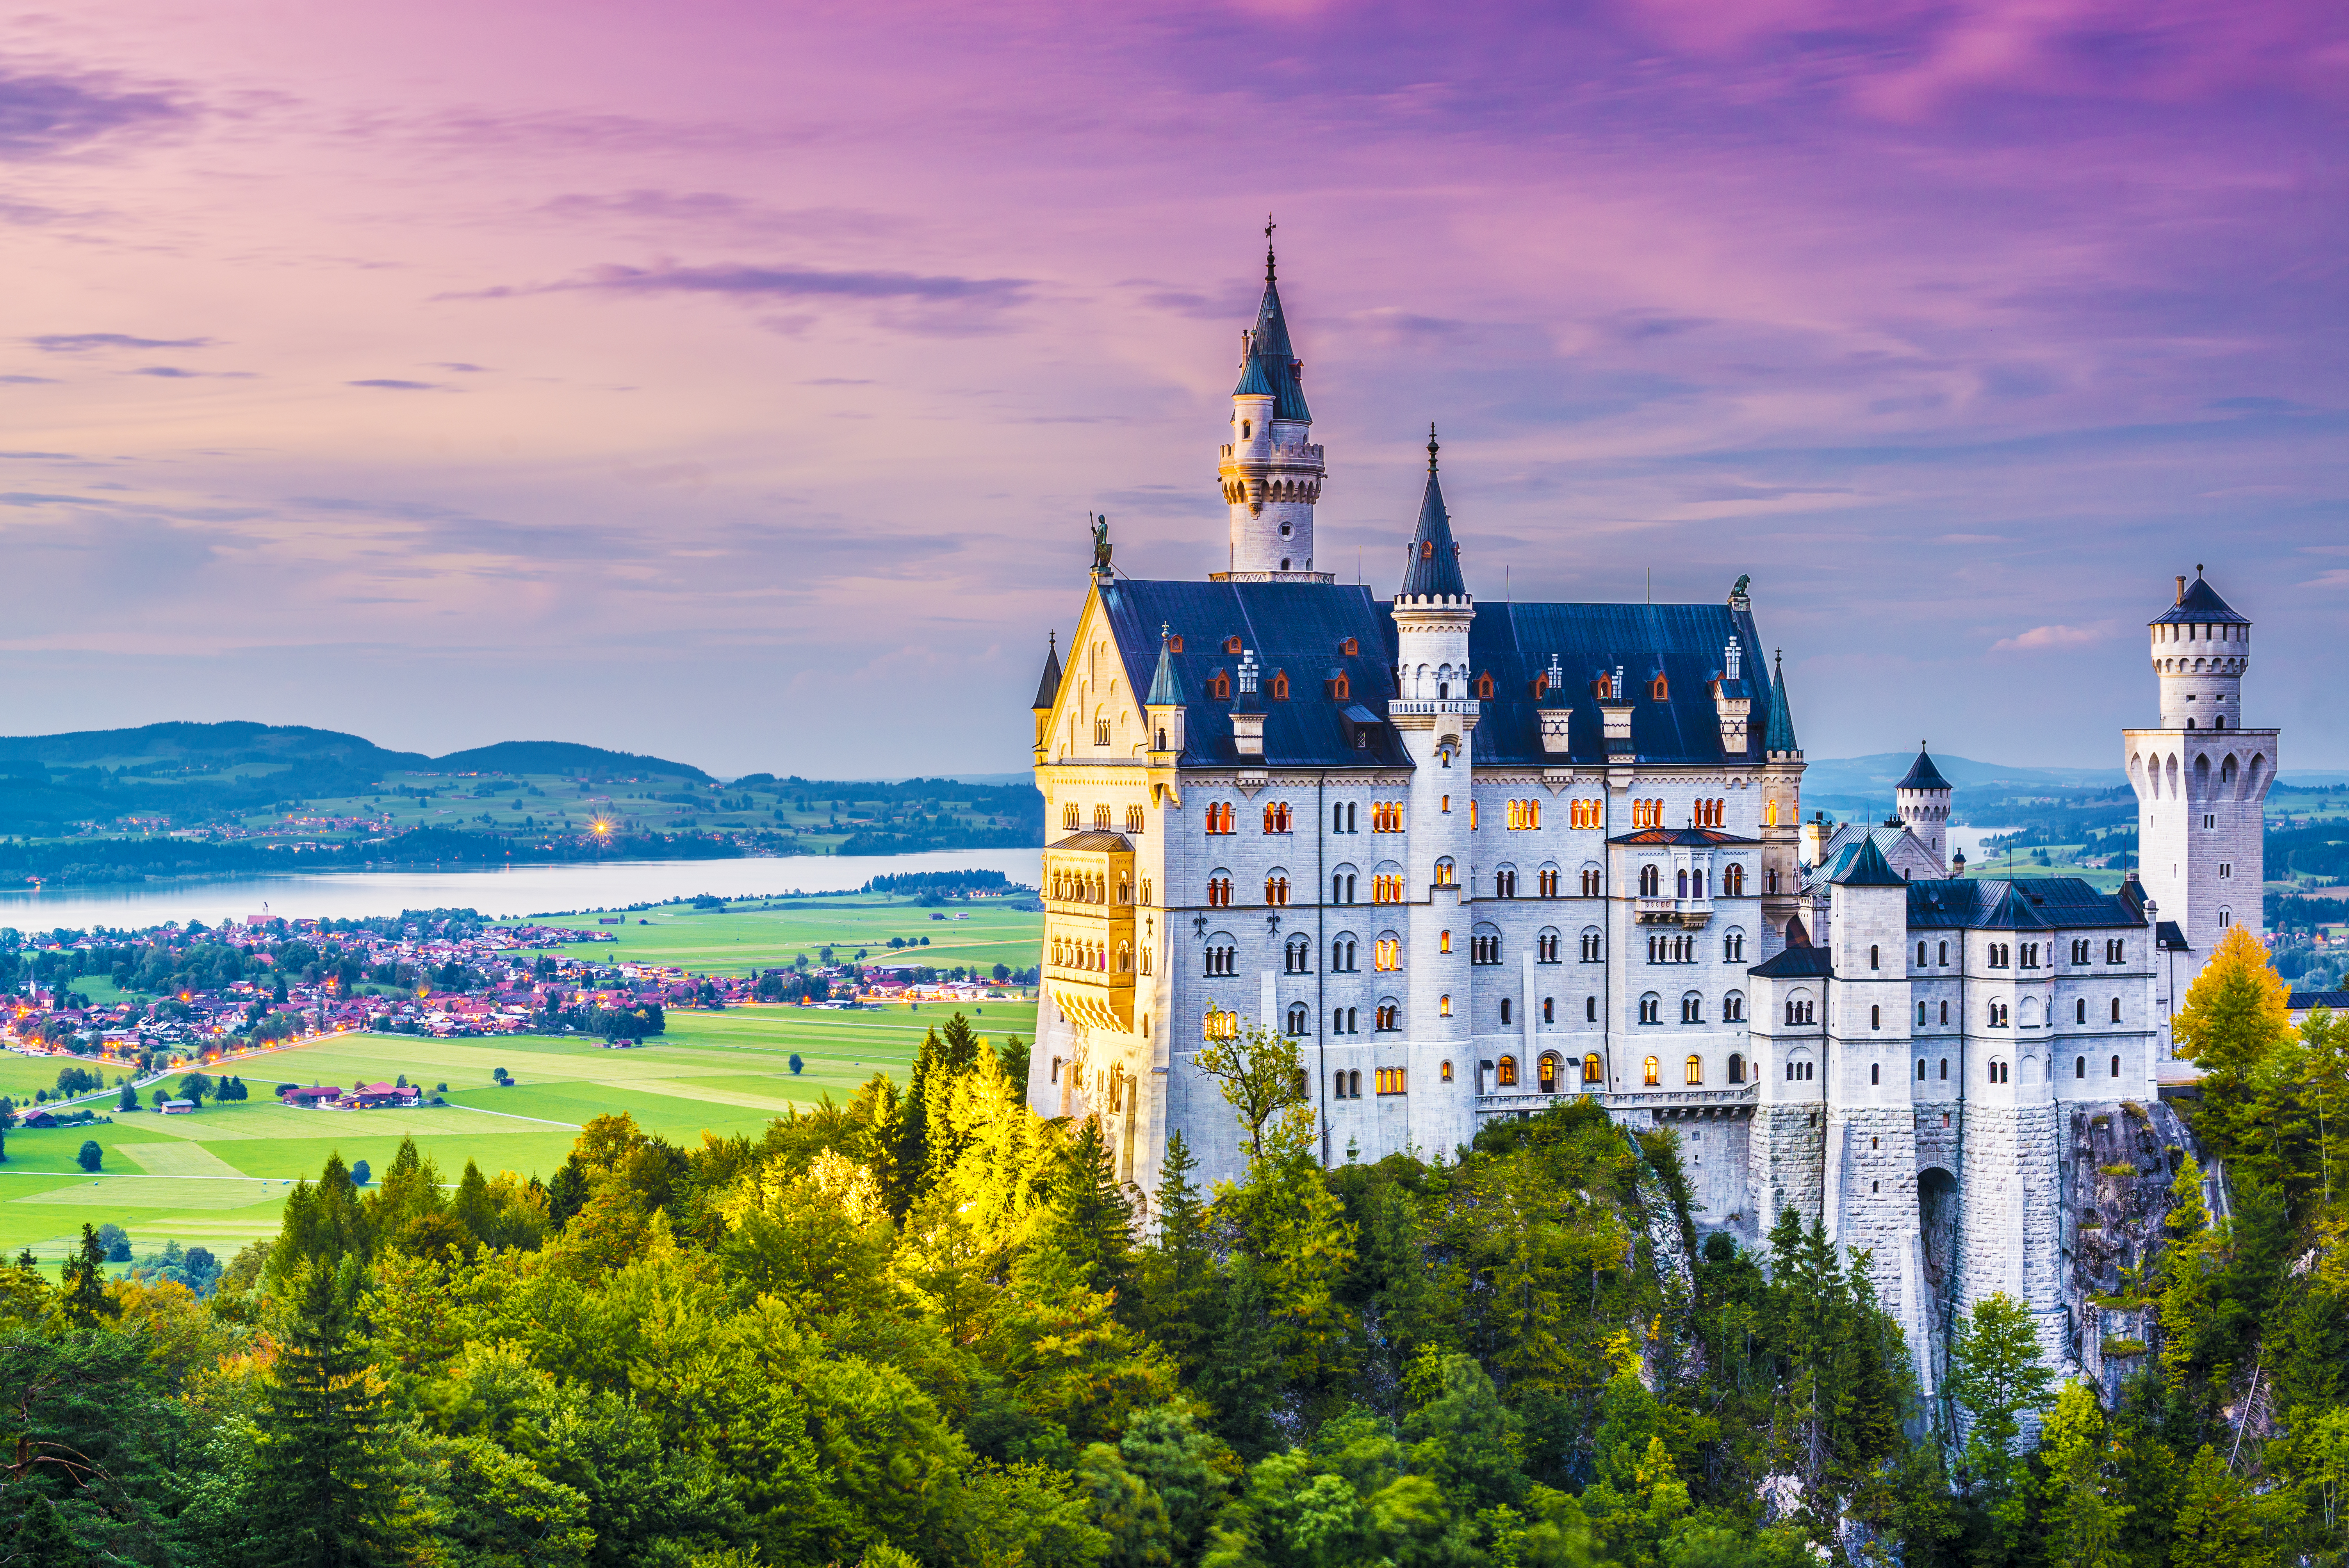 7 Day Amazing Vacation in Paris and Munich with Your Family - Neuschwanstein Castle in Munich